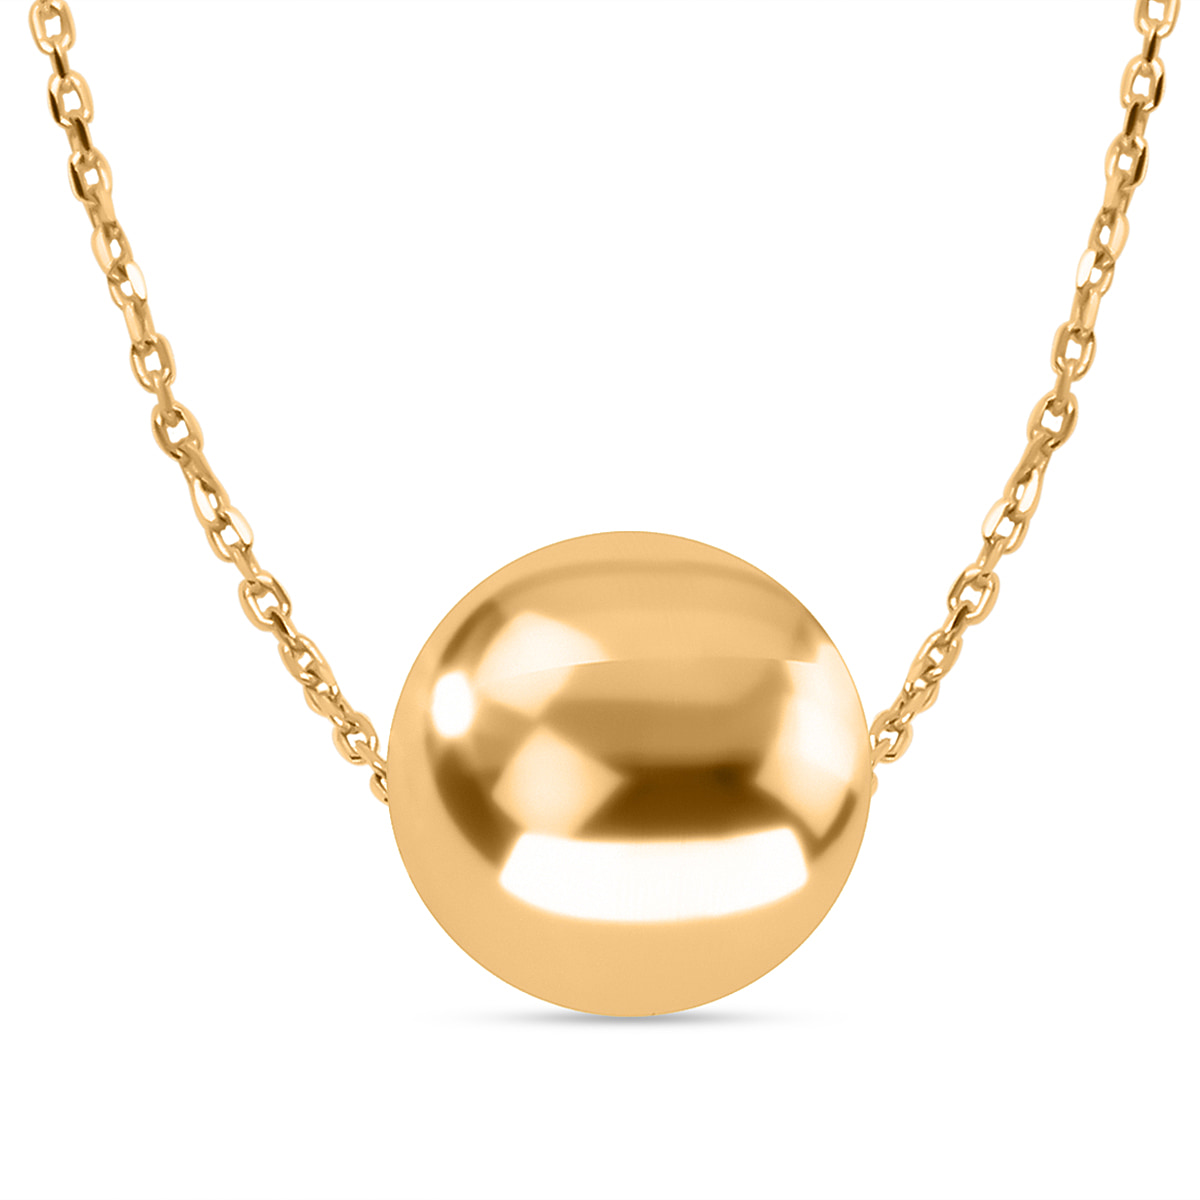 Maestro Collection - 9K Yellow Gold Mirror Bead Necklace (Size - 20)